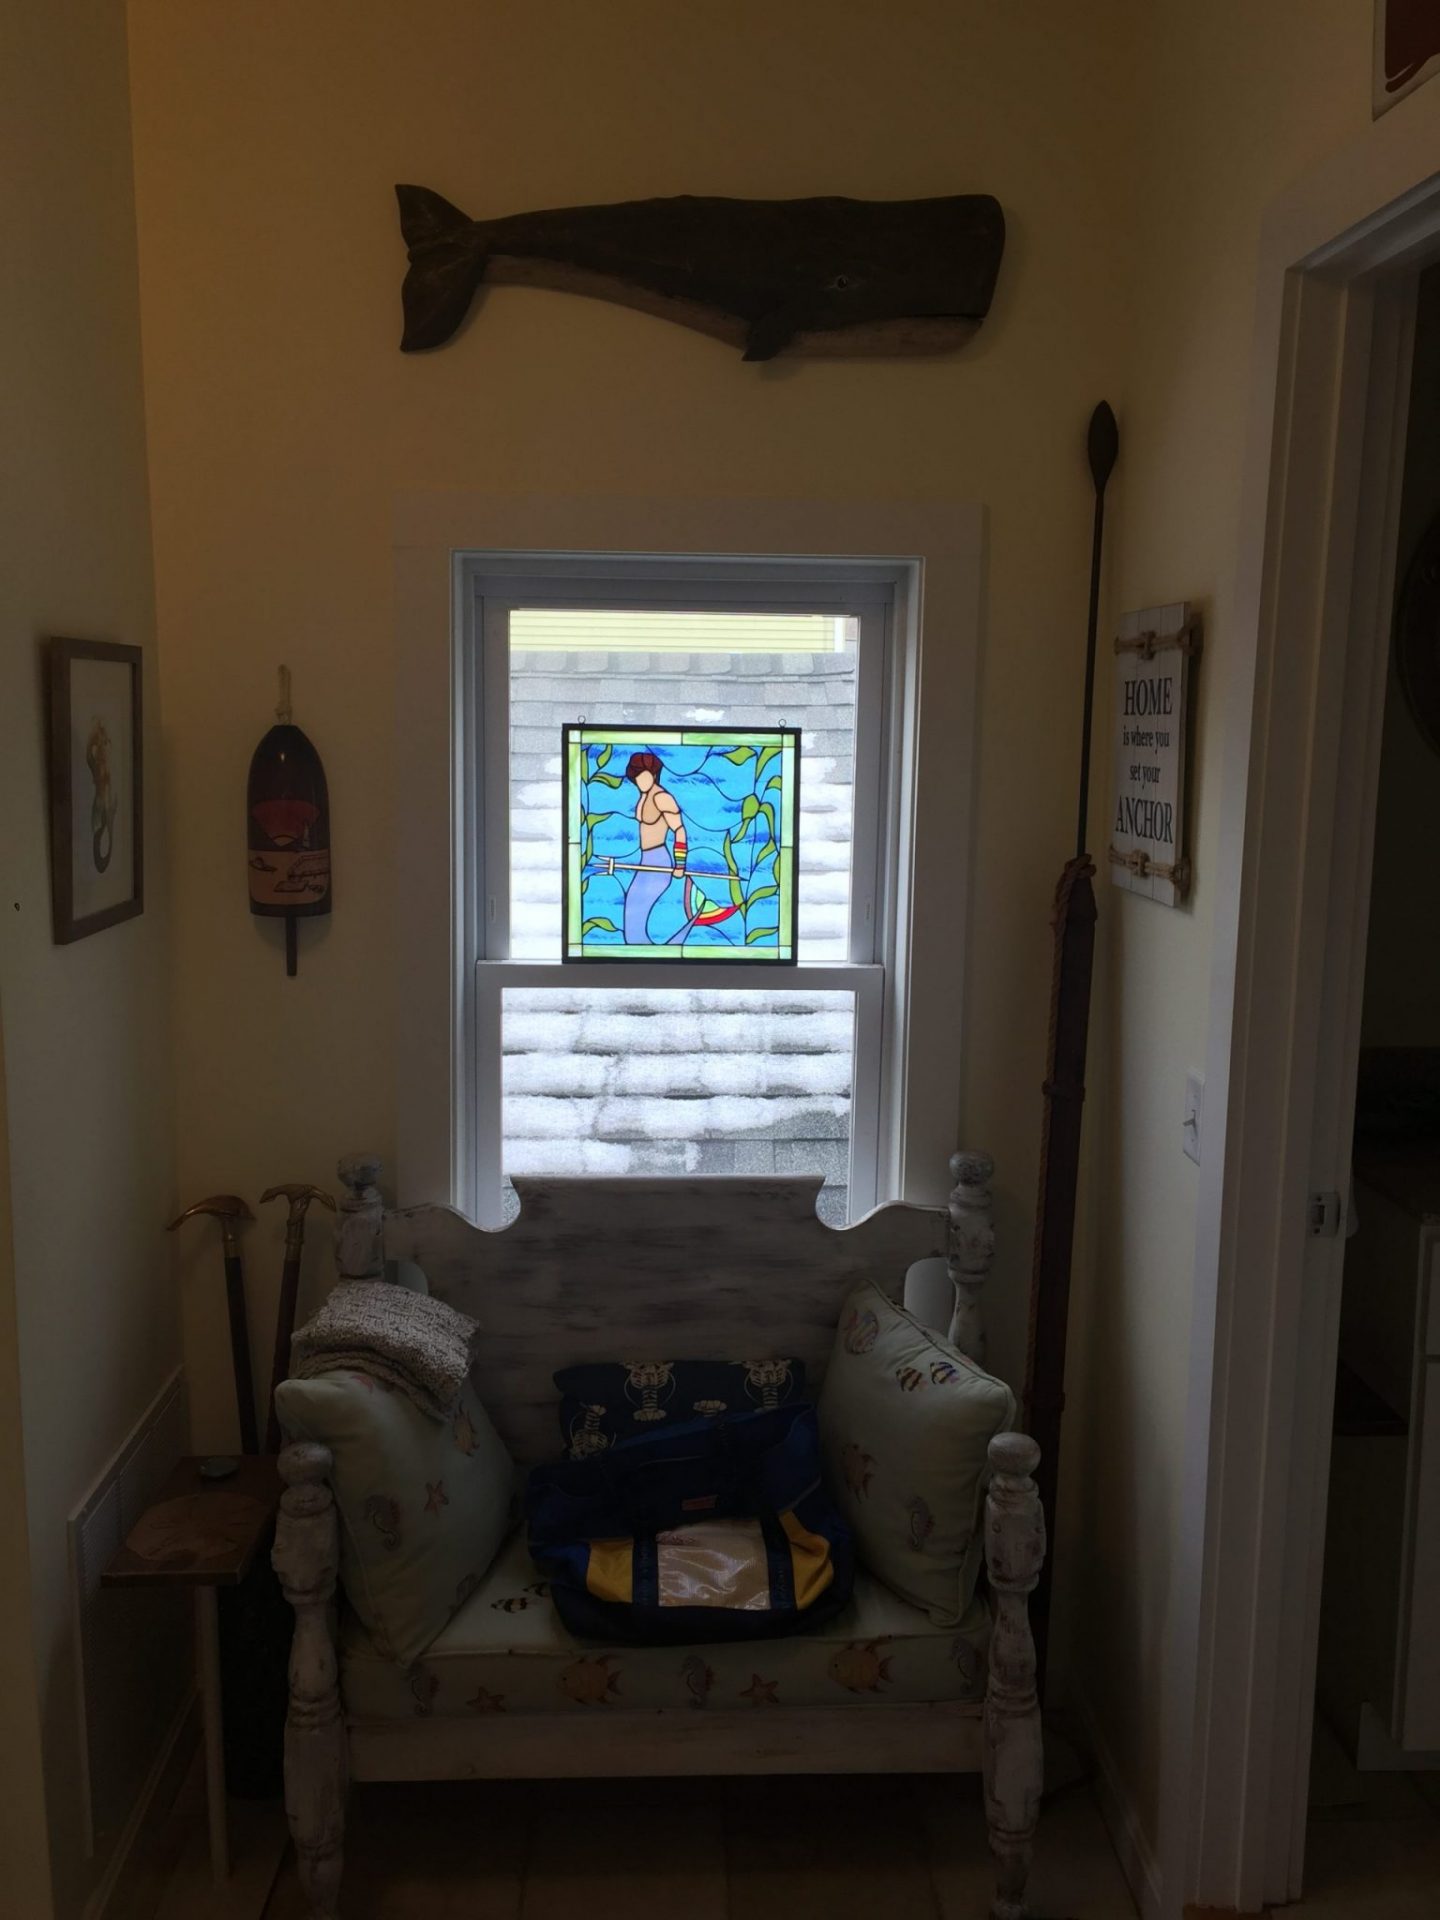 Merman Stained Glass Panel Suspended in a Window